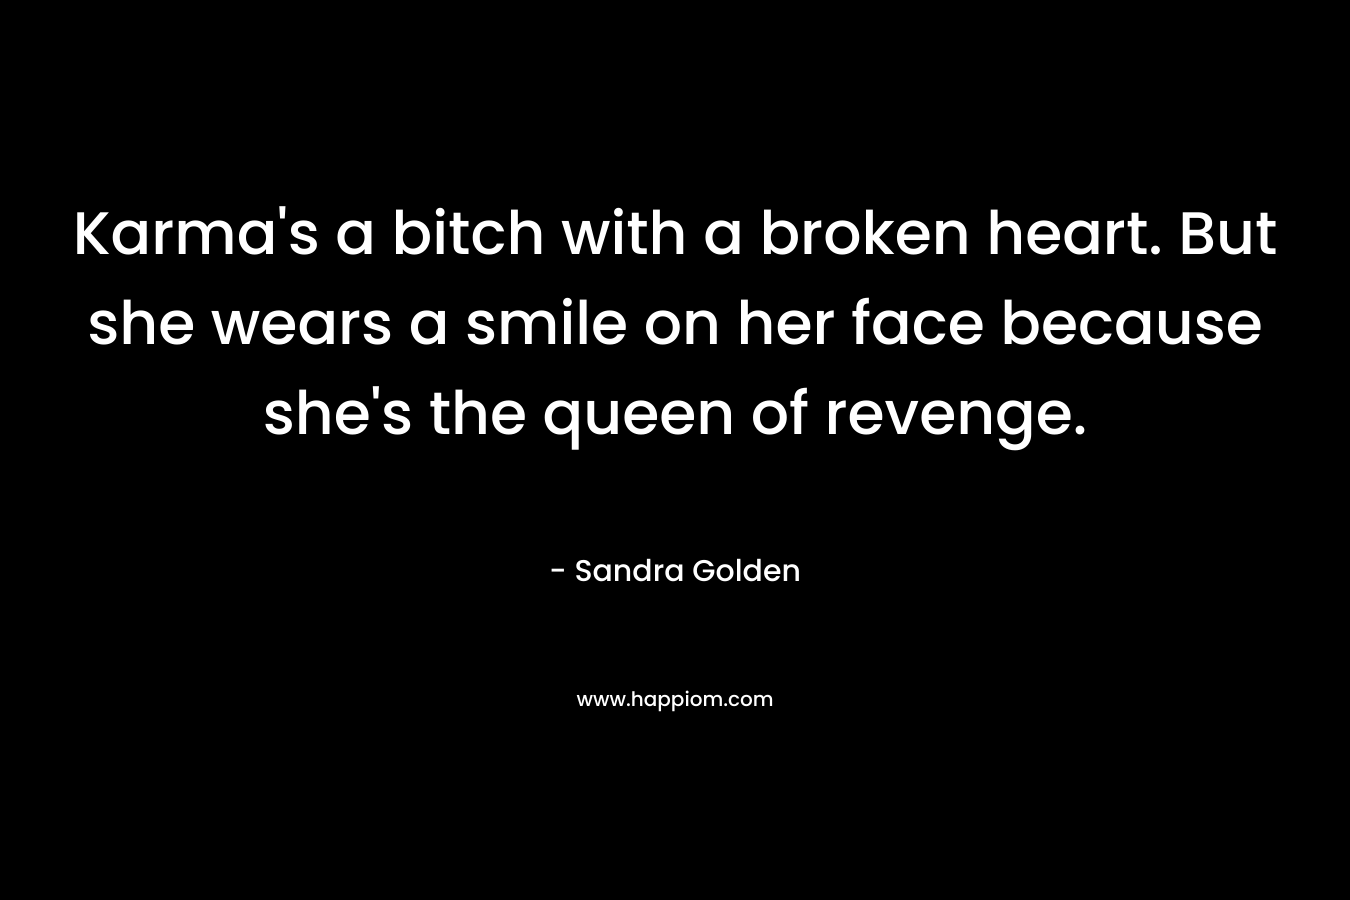 Karma's a bitch with a broken heart. But she wears a smile on her face because she's the queen of revenge.